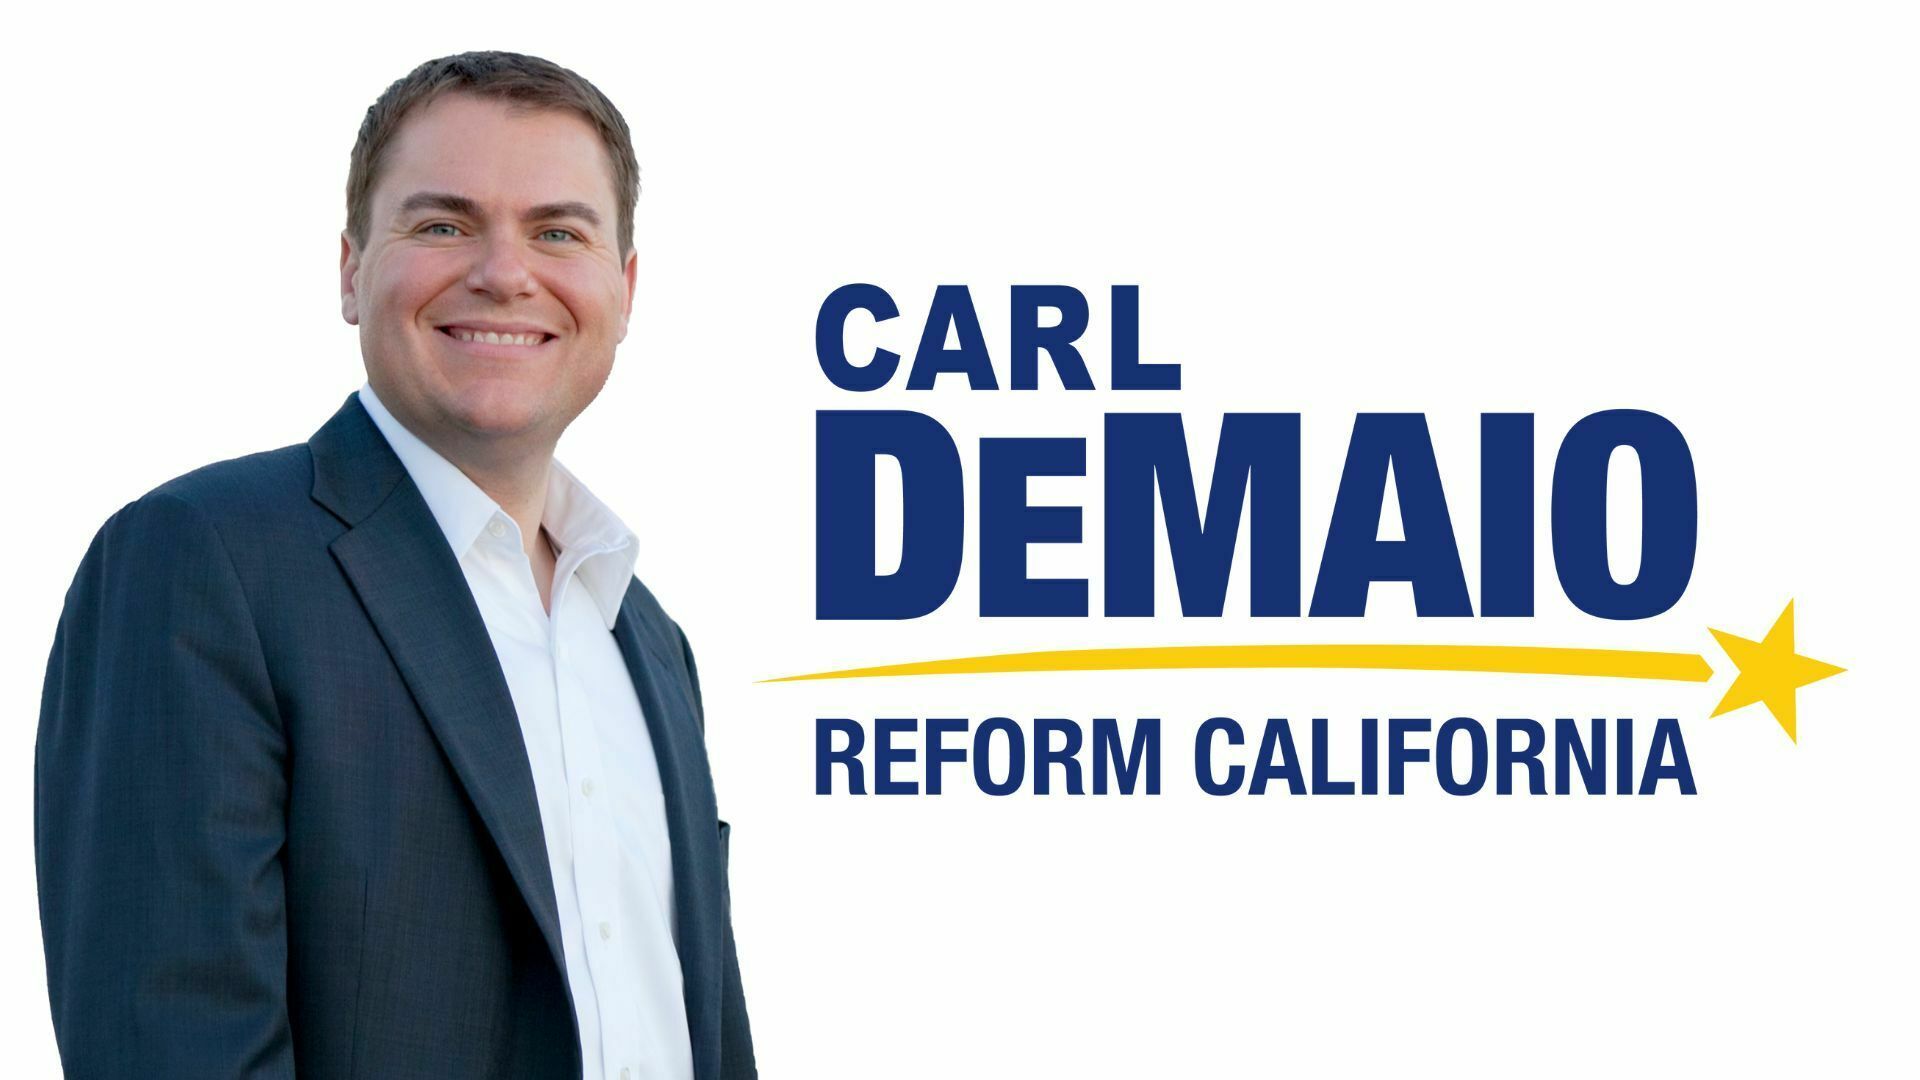 Join carl demaio to reform california 1920x1080